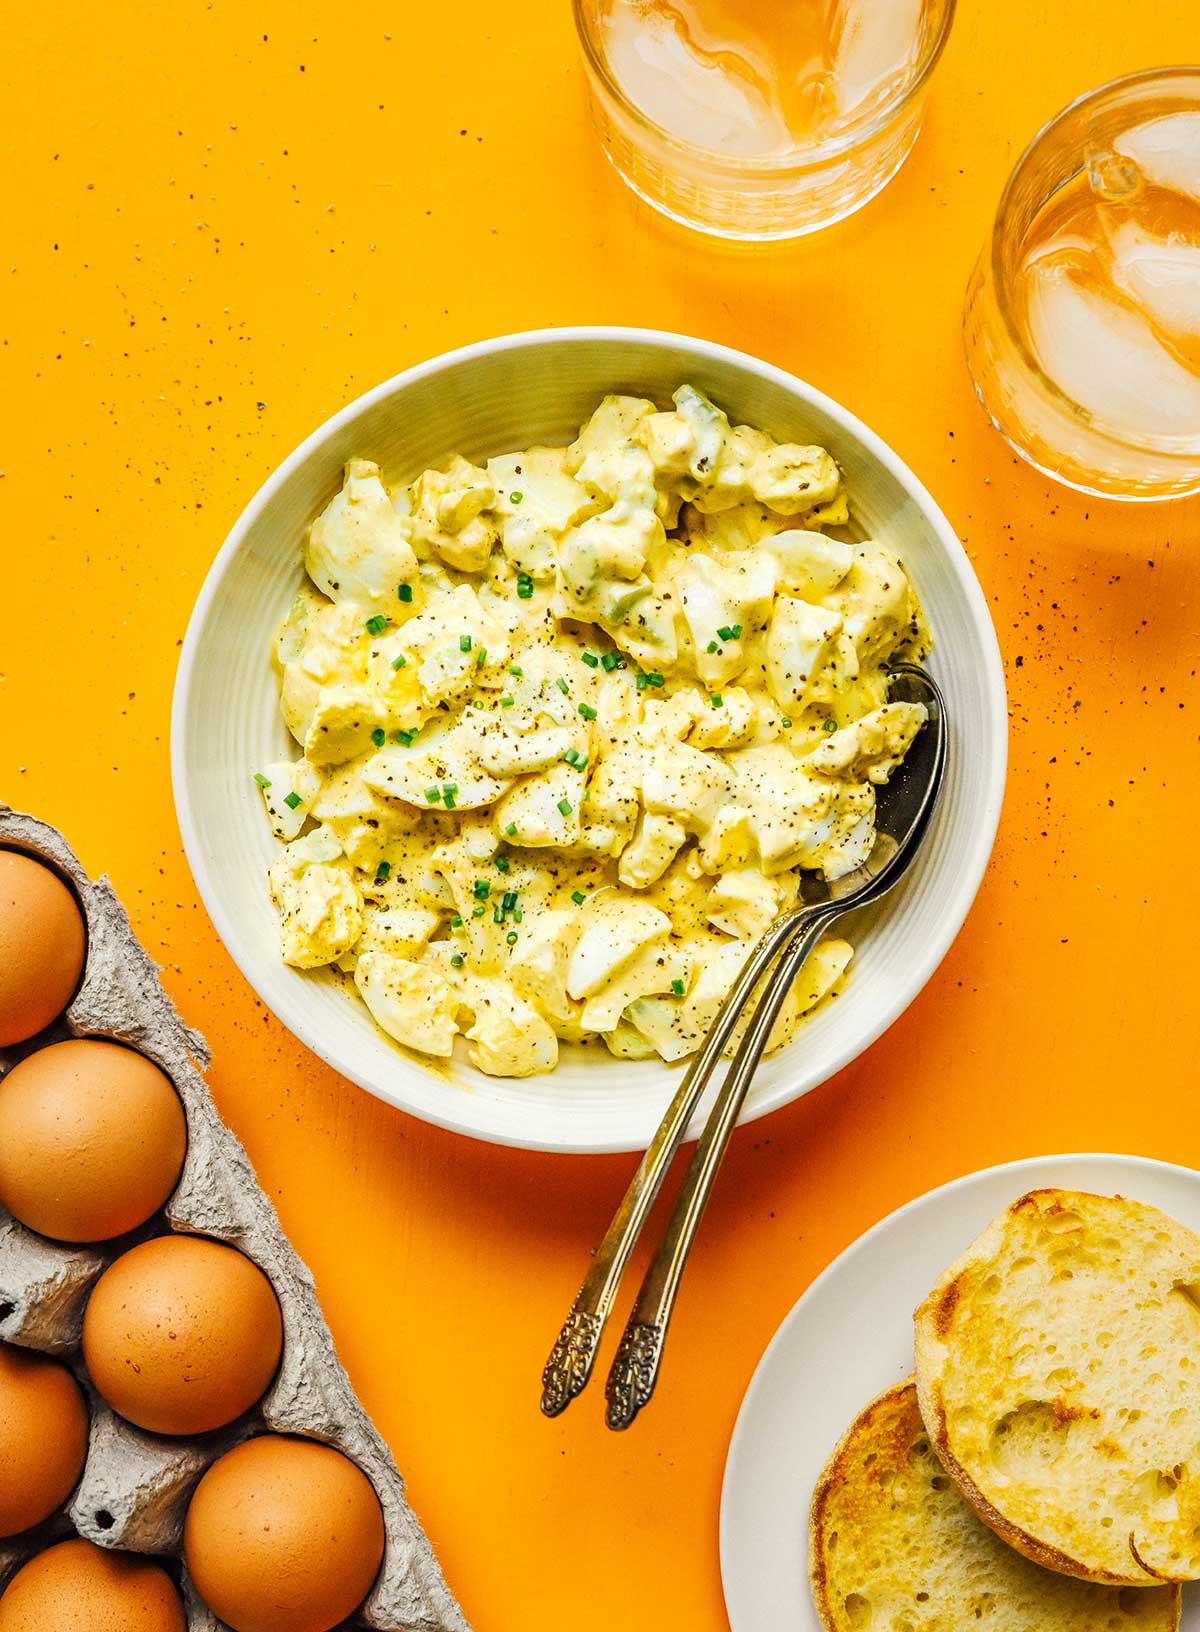 A white ceramic bowl filled with fresh healthy egg salad with two spoons dipped in